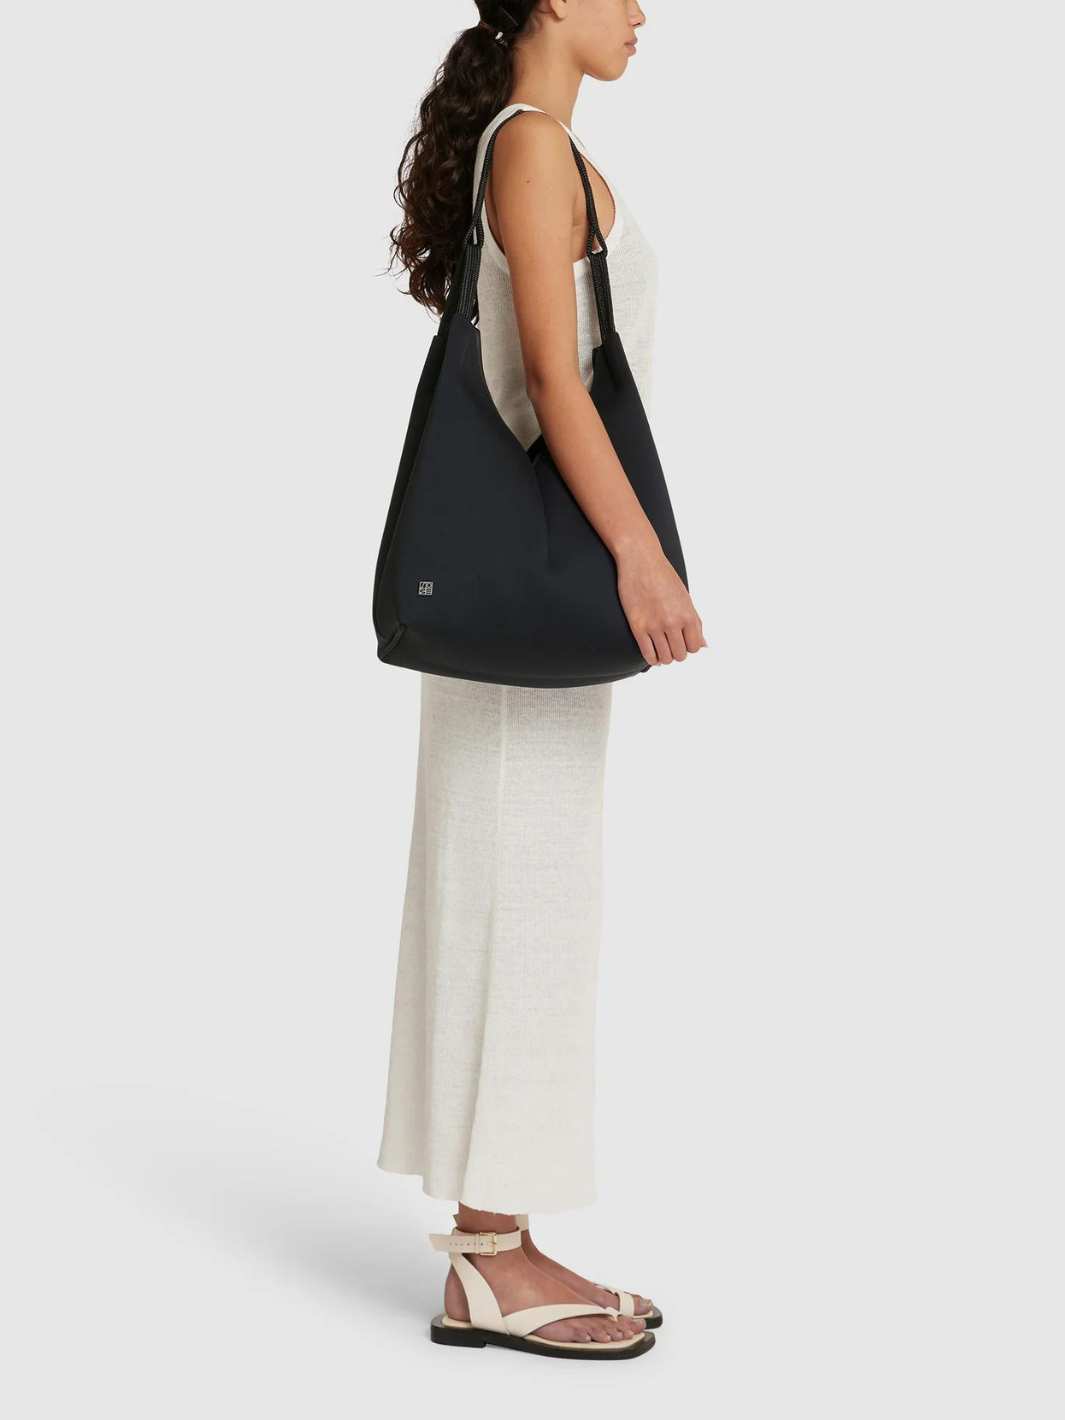 State of Escape Bags Bag | Solstice Tote Black